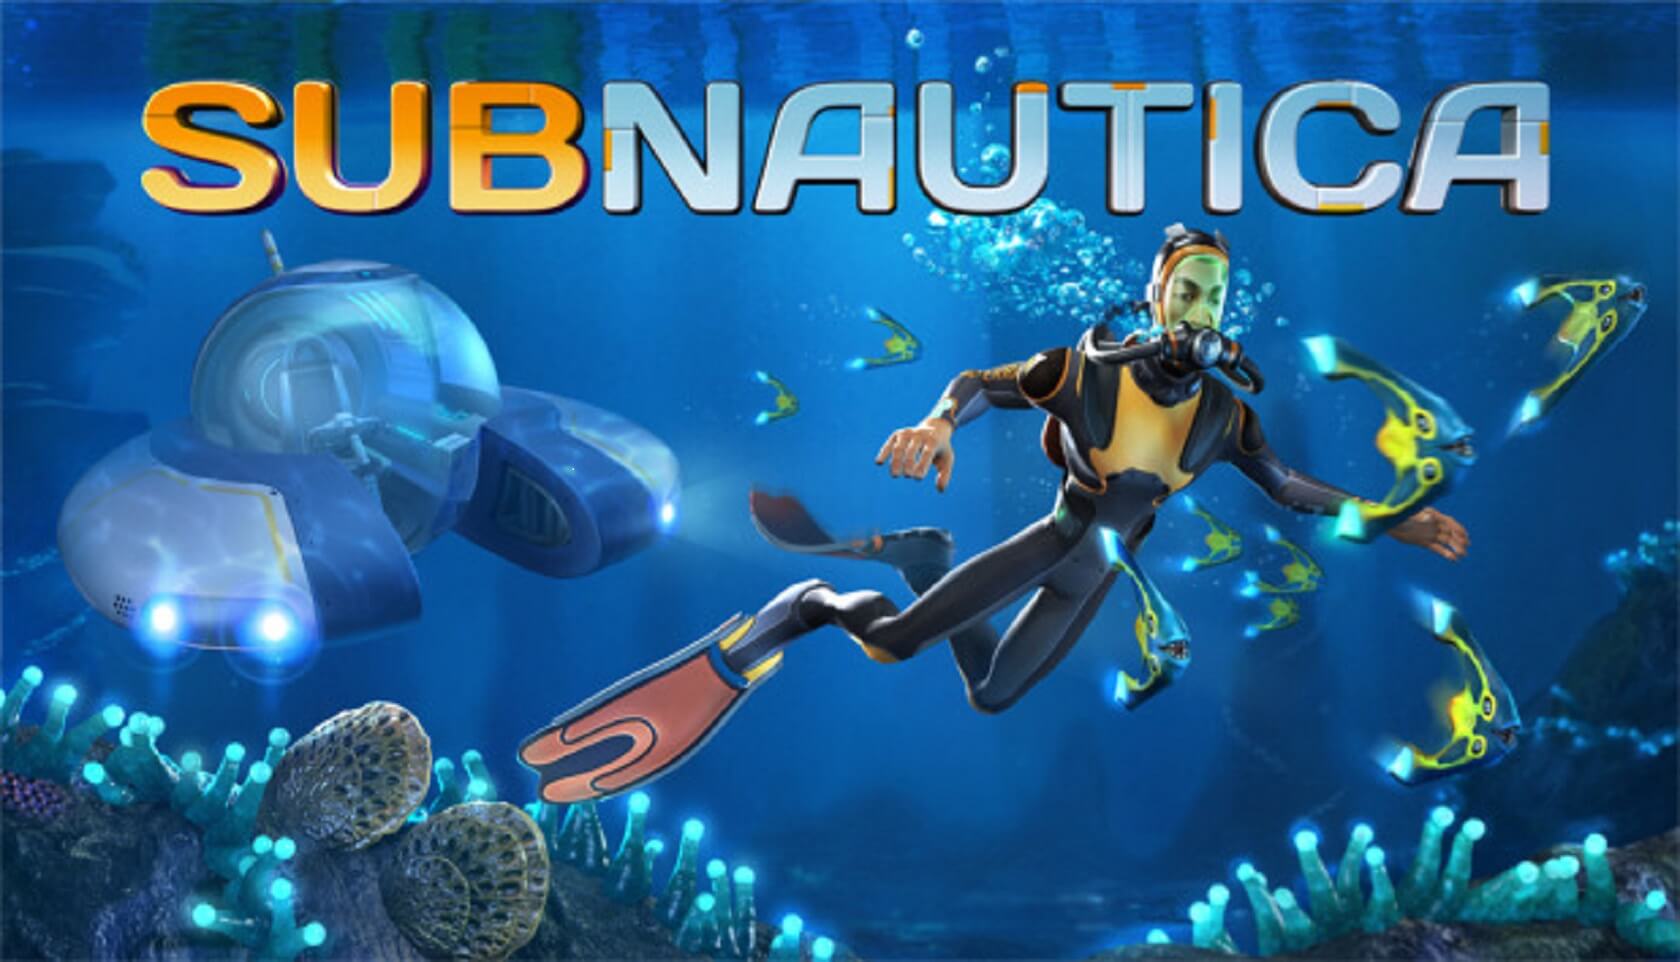 what is the next subnautica game